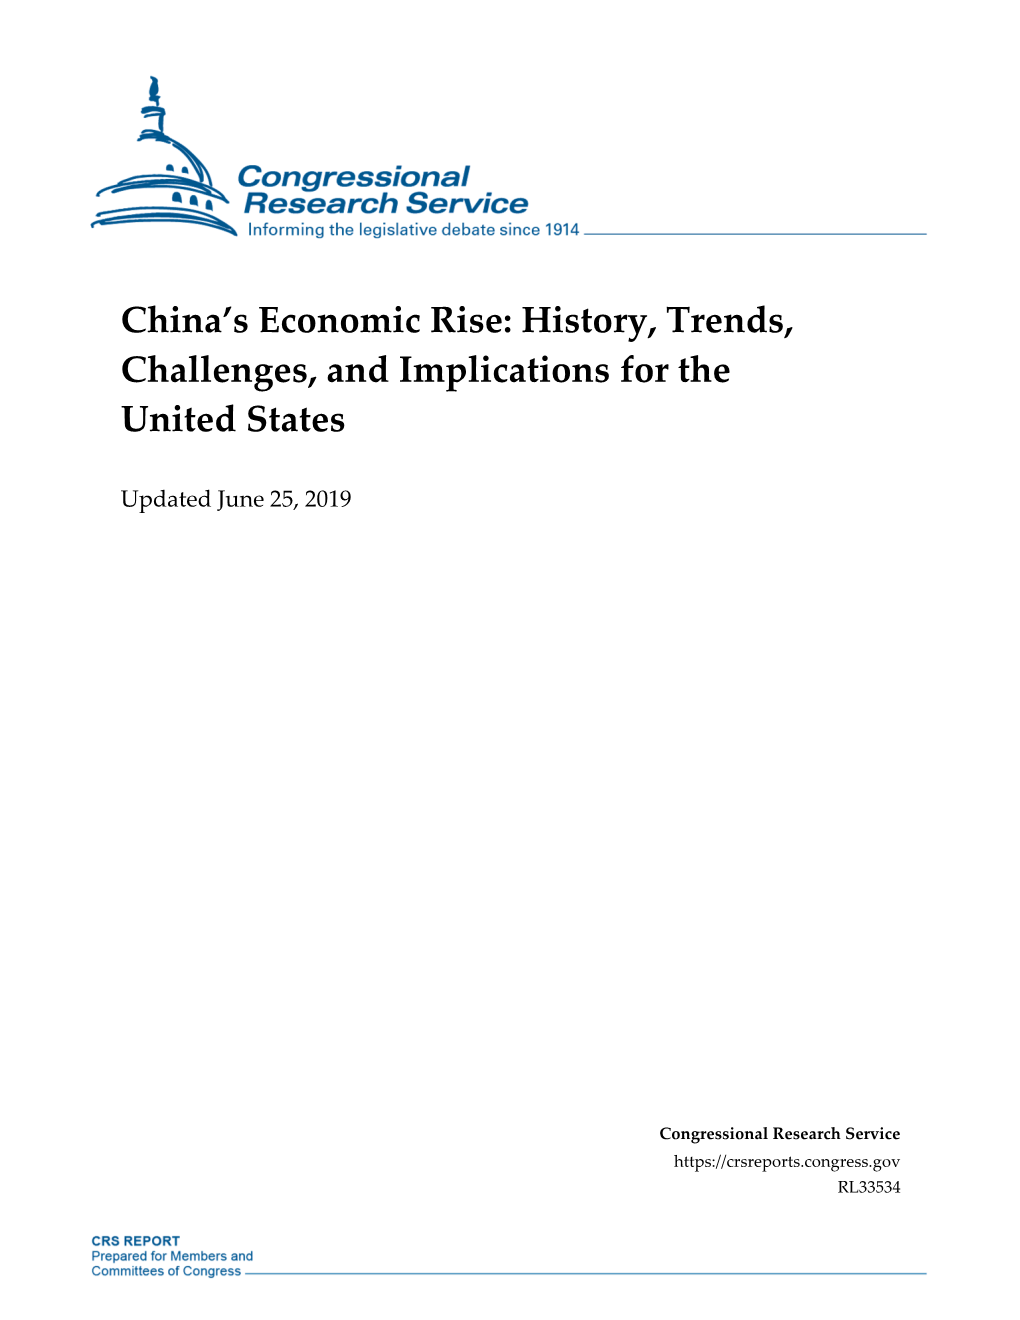 China's Economic Rise: History, Trends, Challenges, Implications For